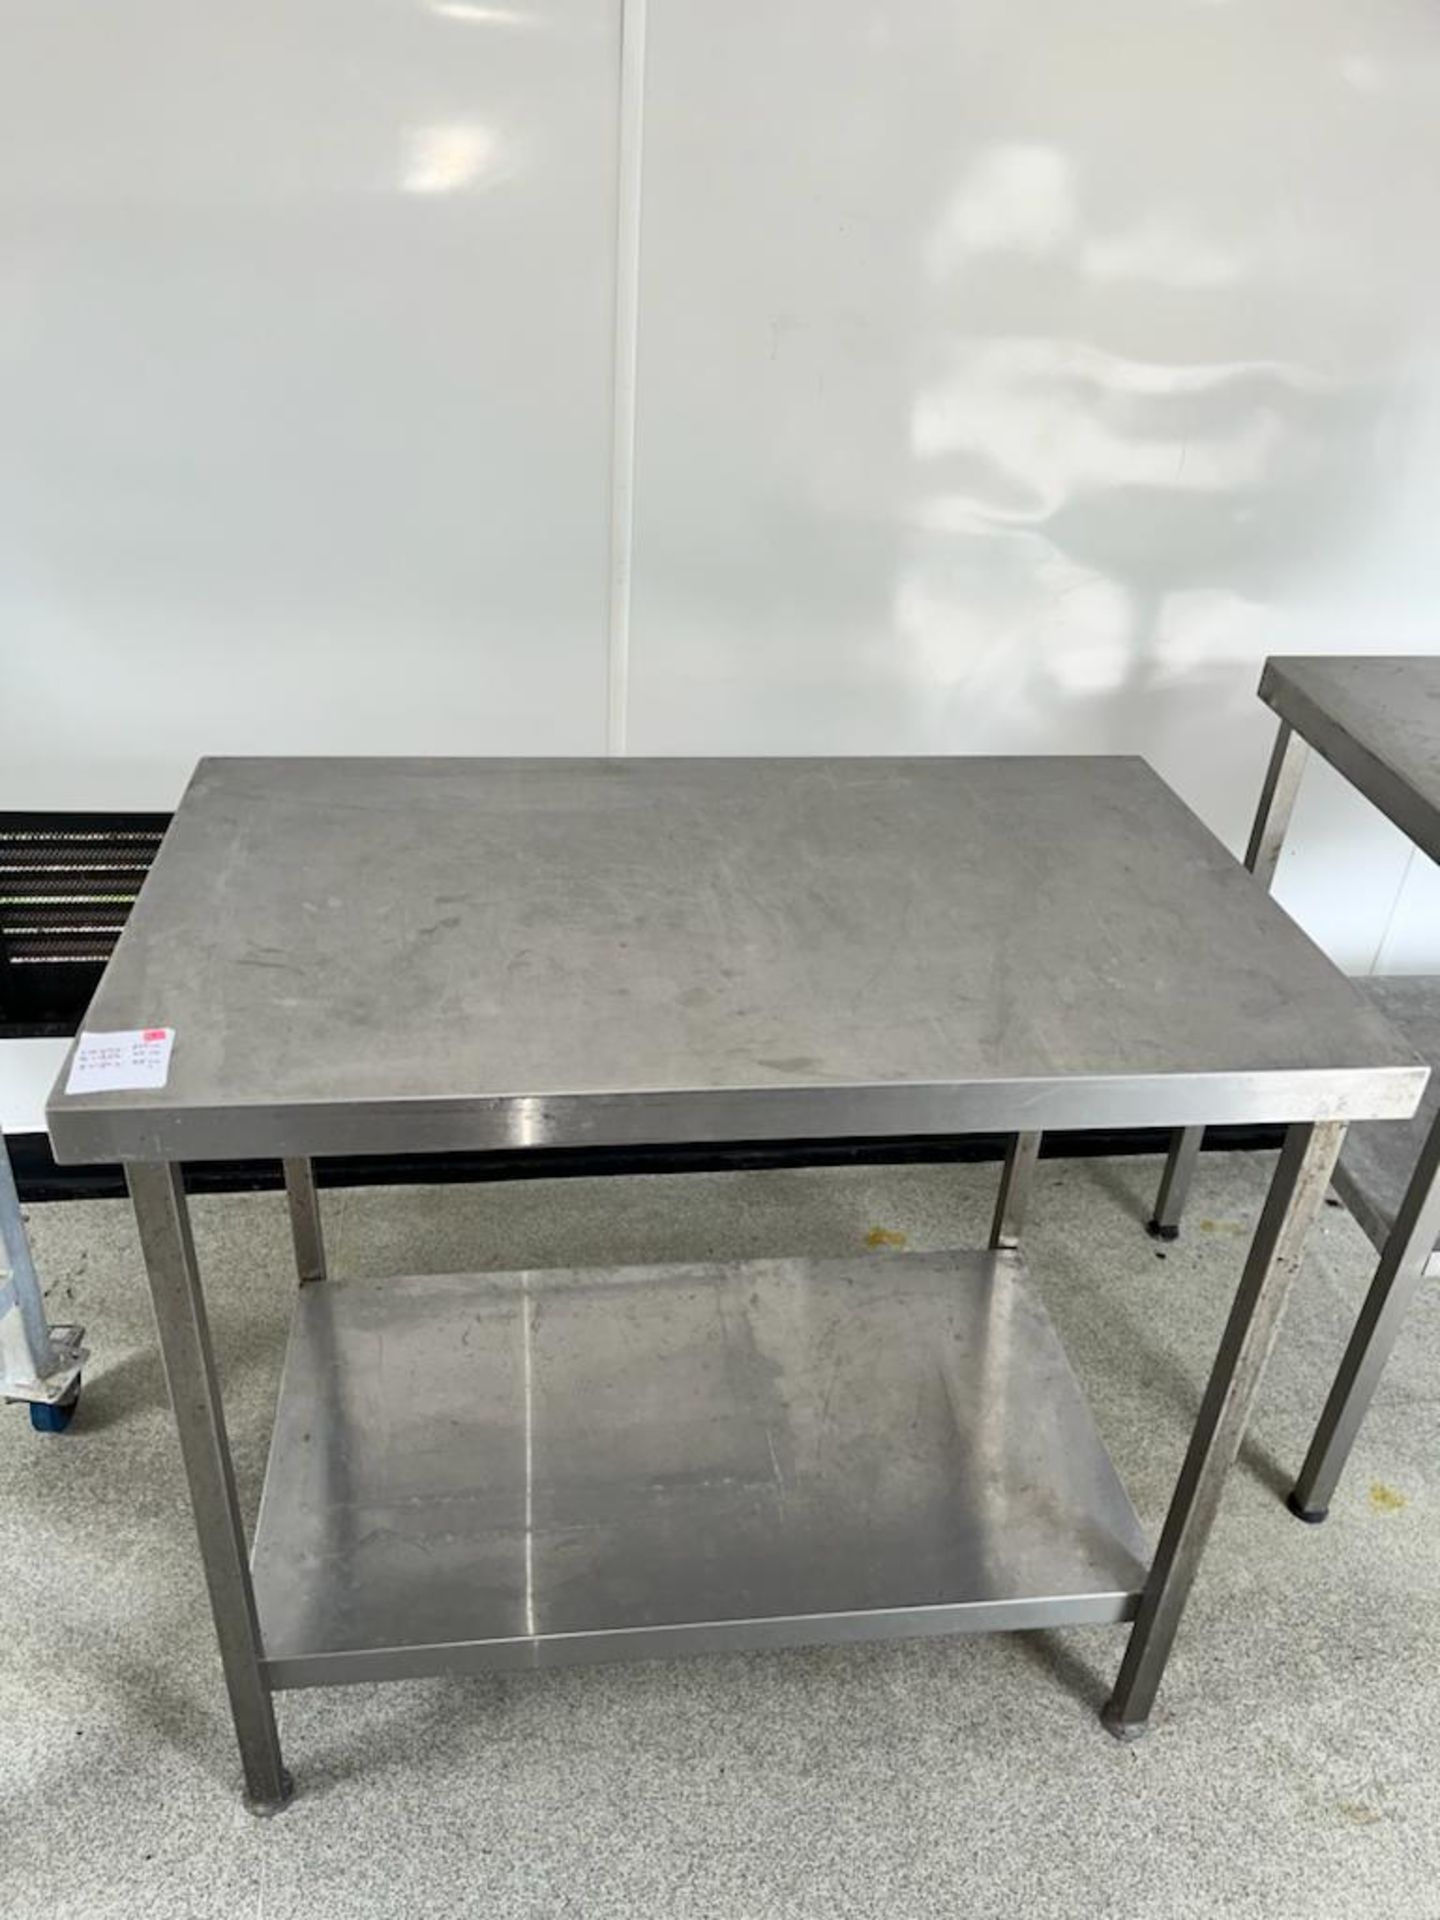 S/S TABLE APPROX. 1000 x 600 MM. (GL19 4BA).